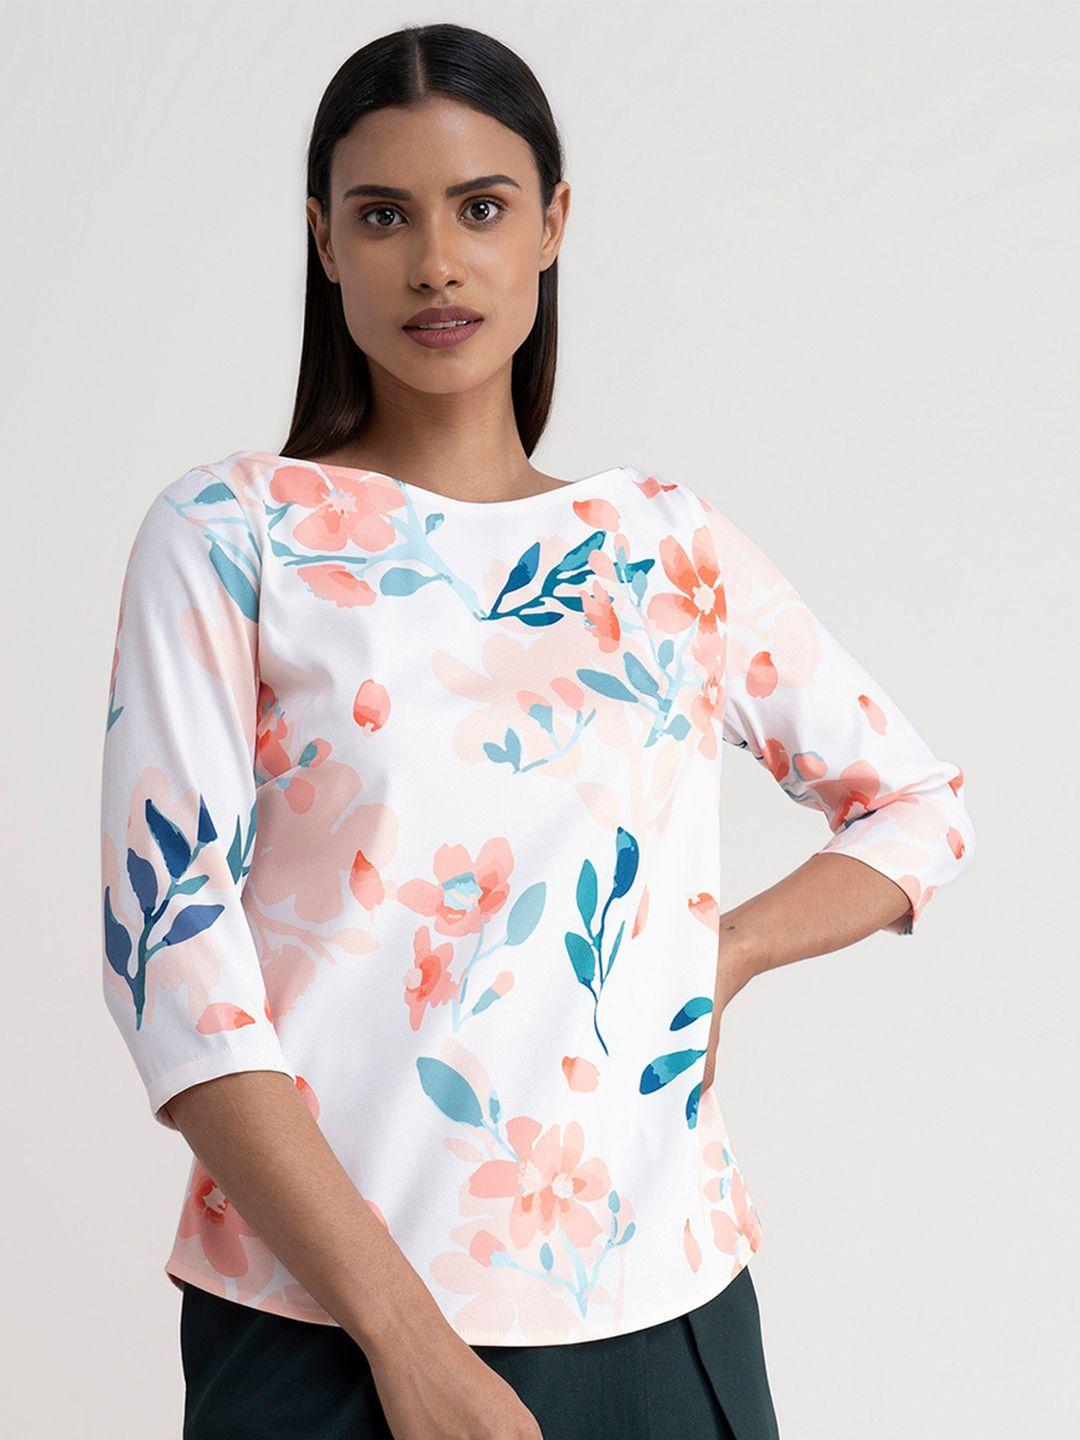 fablestreet-white-&-blue-floral-print-top